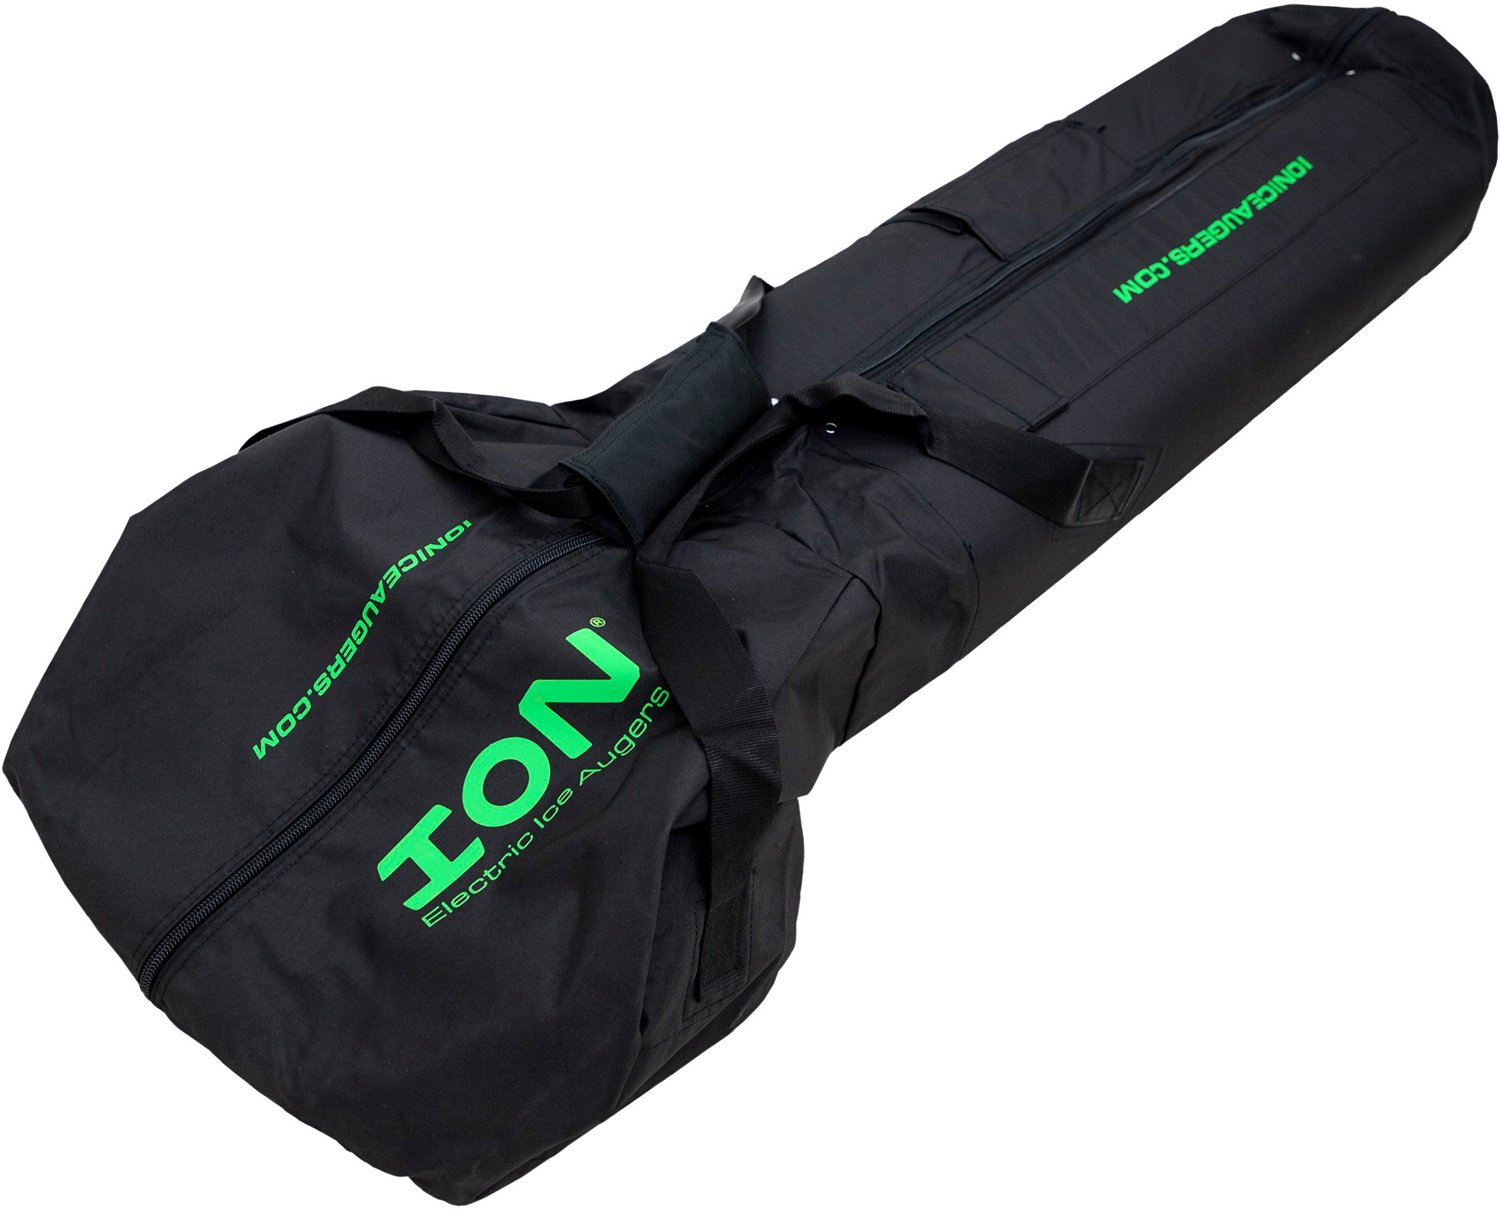 ION Auger Carry Storage Bag | Free Shipping at Academy